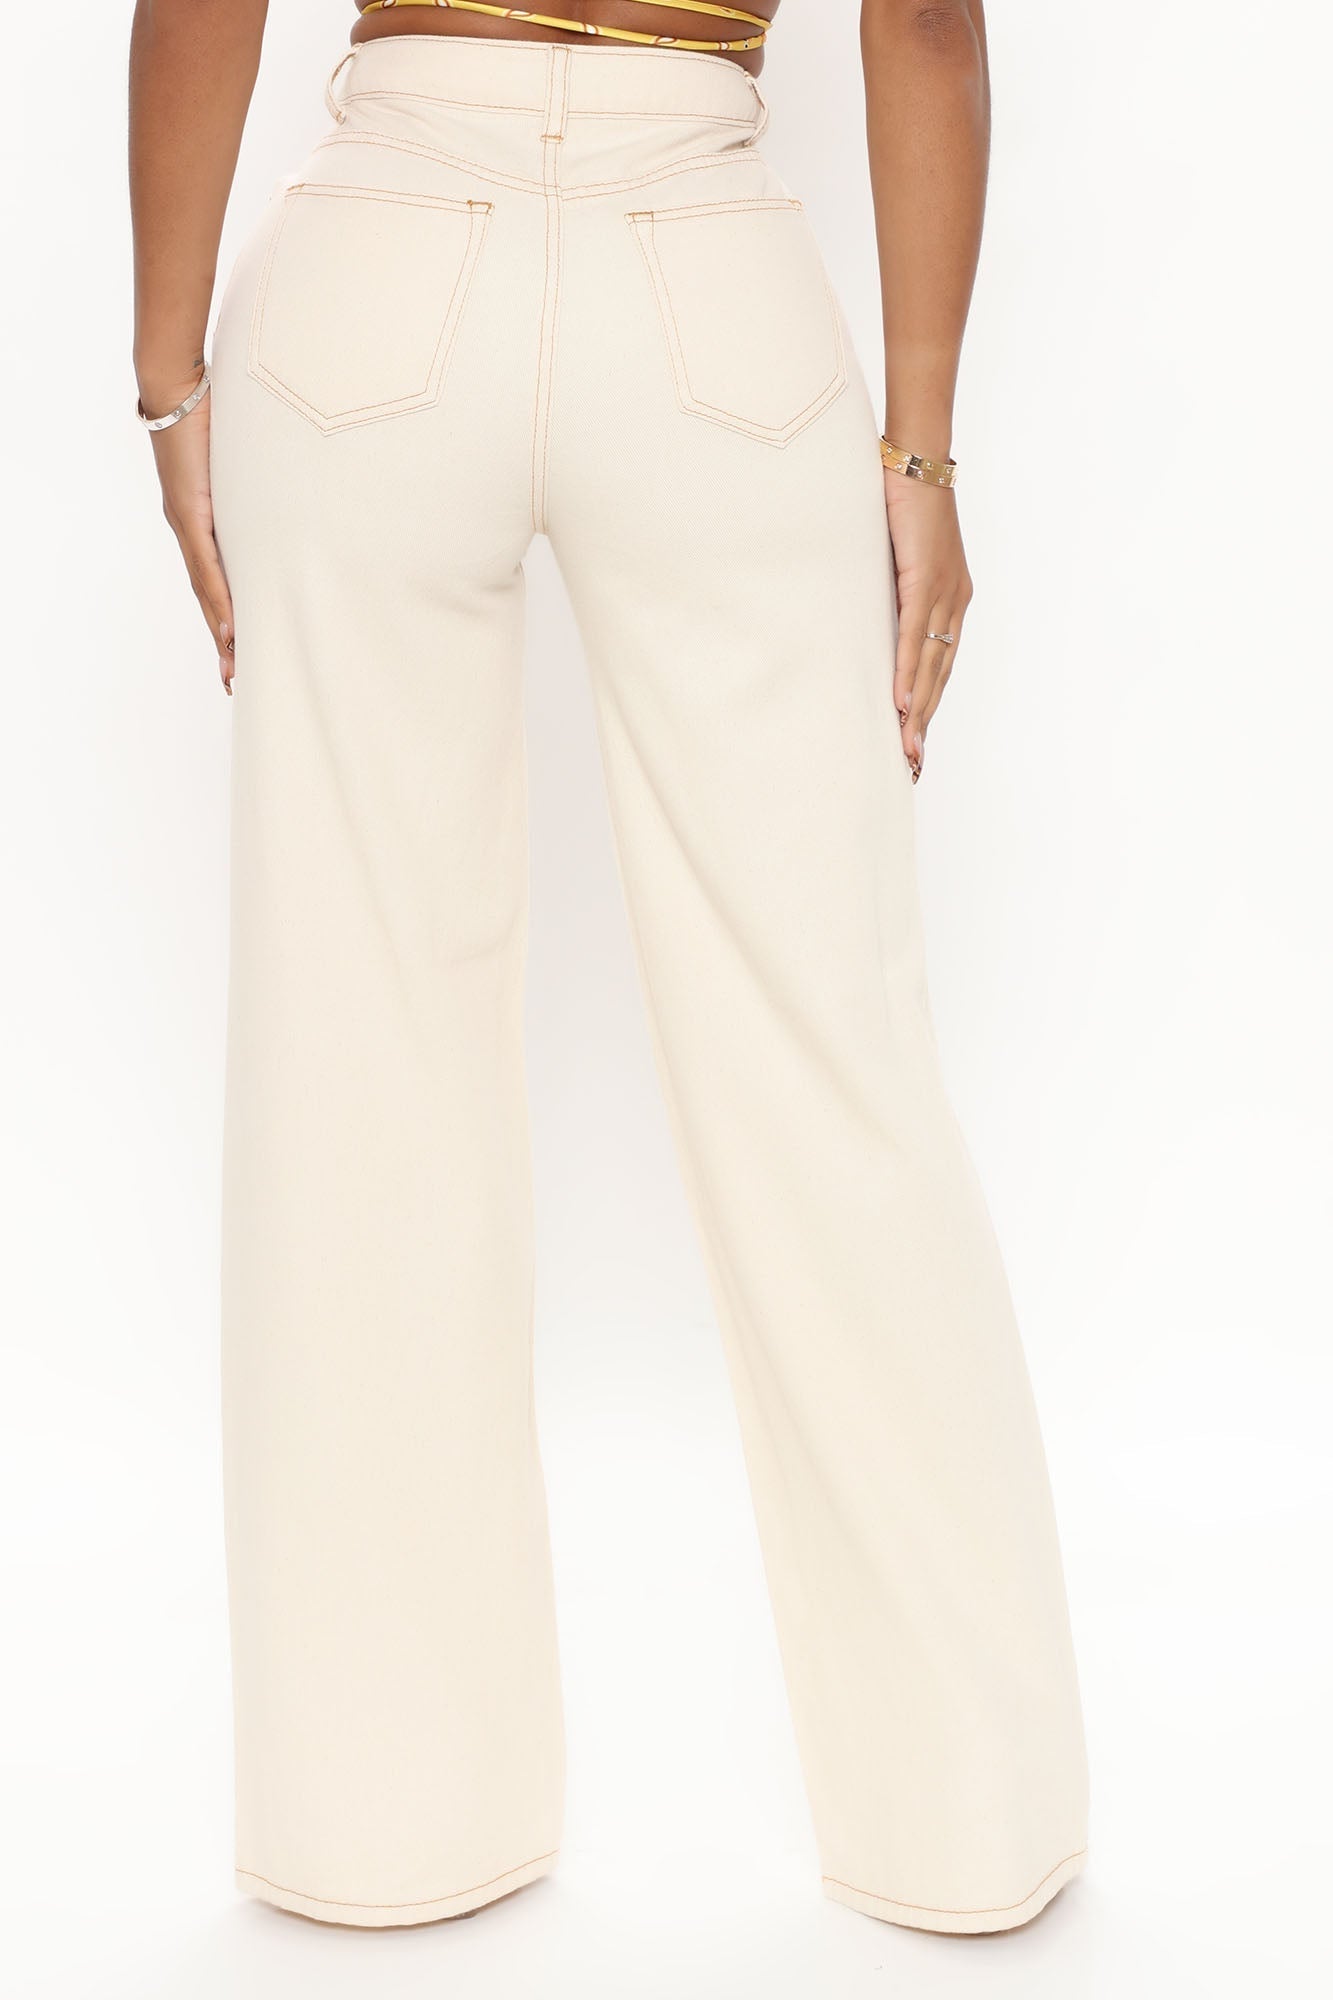 Natural Attraction Non Stretch Wide Leg Jeans - Sand